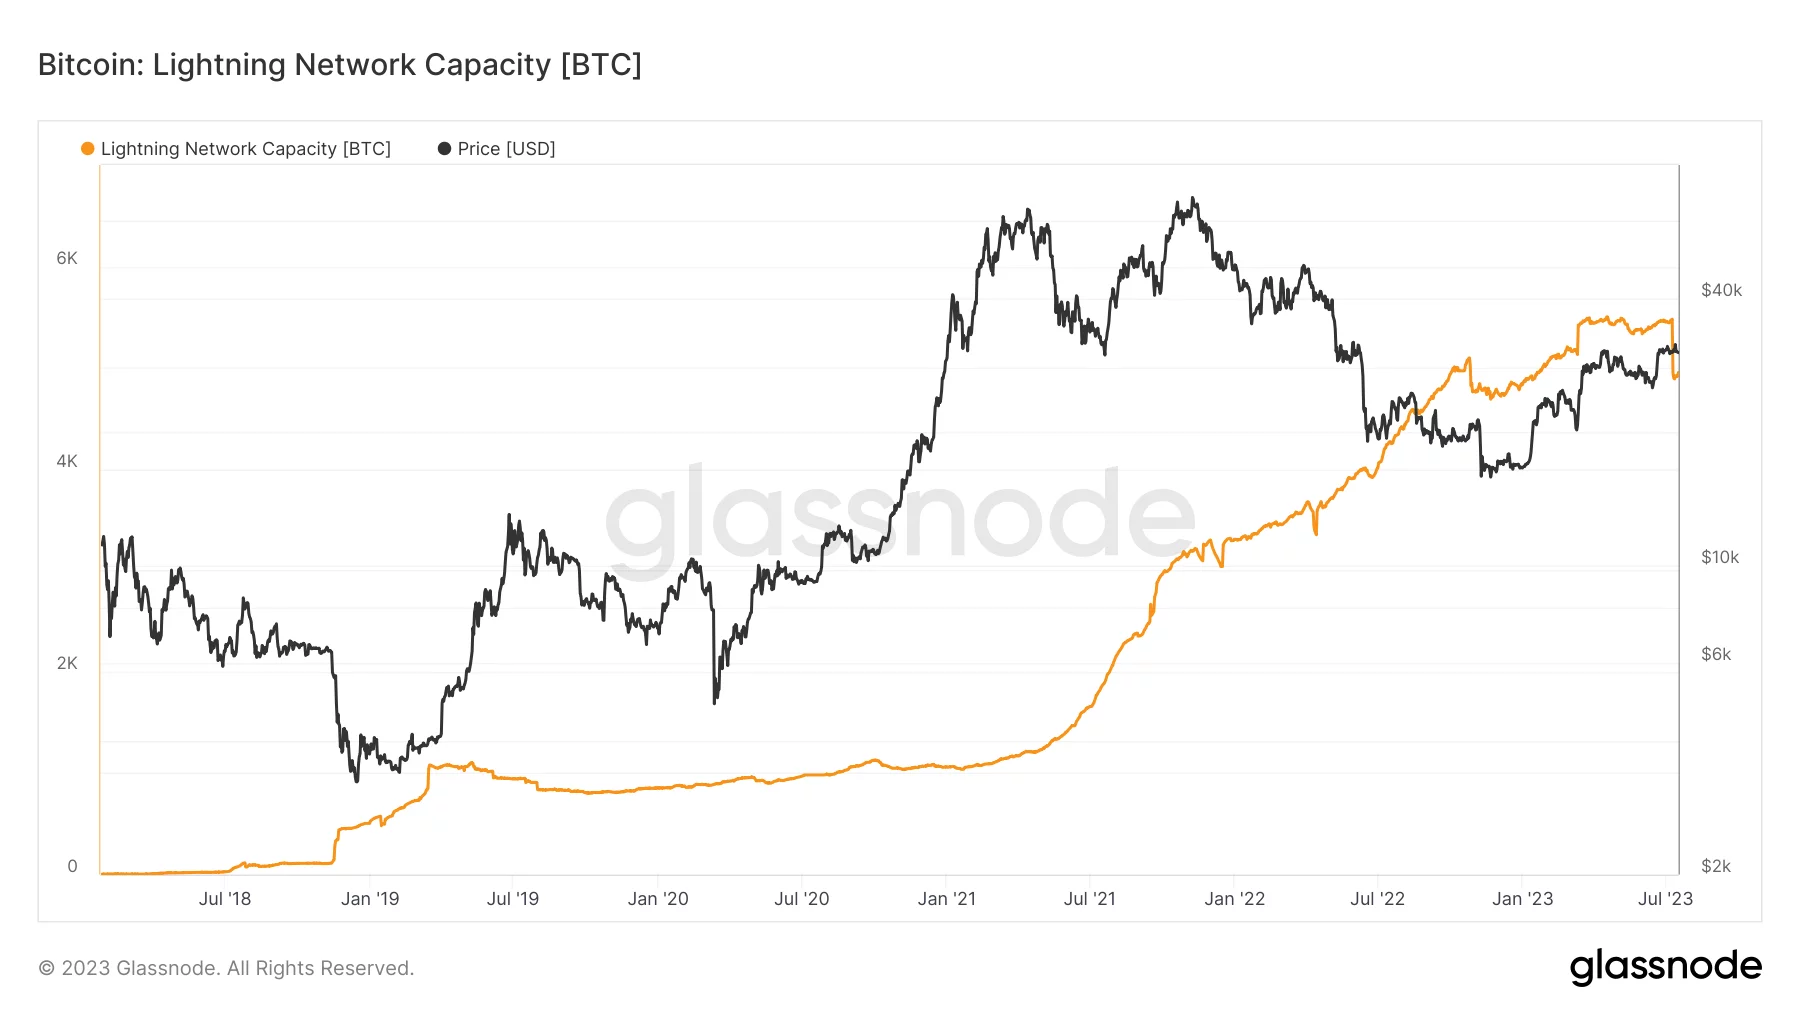 Figure 1 - Lightning Network capacity in BTC, compared to BTC price